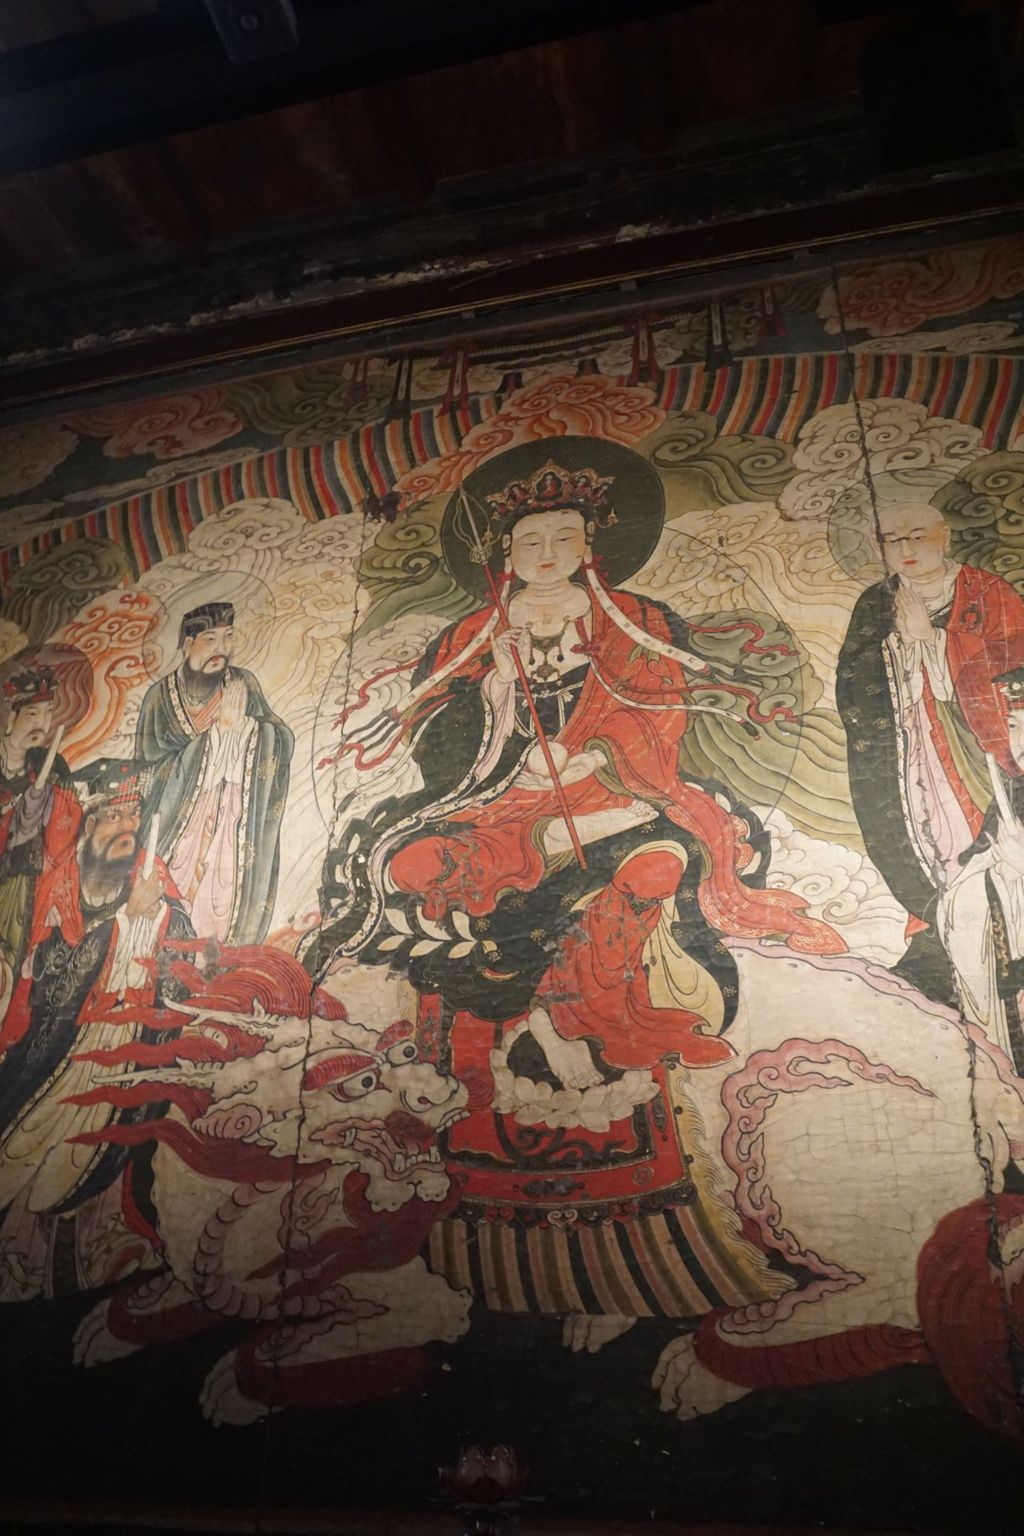 Miniature of Dizang Bodhisattva with the Ten Kings of Hell Mural from Zhihua Hall (Zhihuadian, Hall of Transforming Wisdom), Dizang